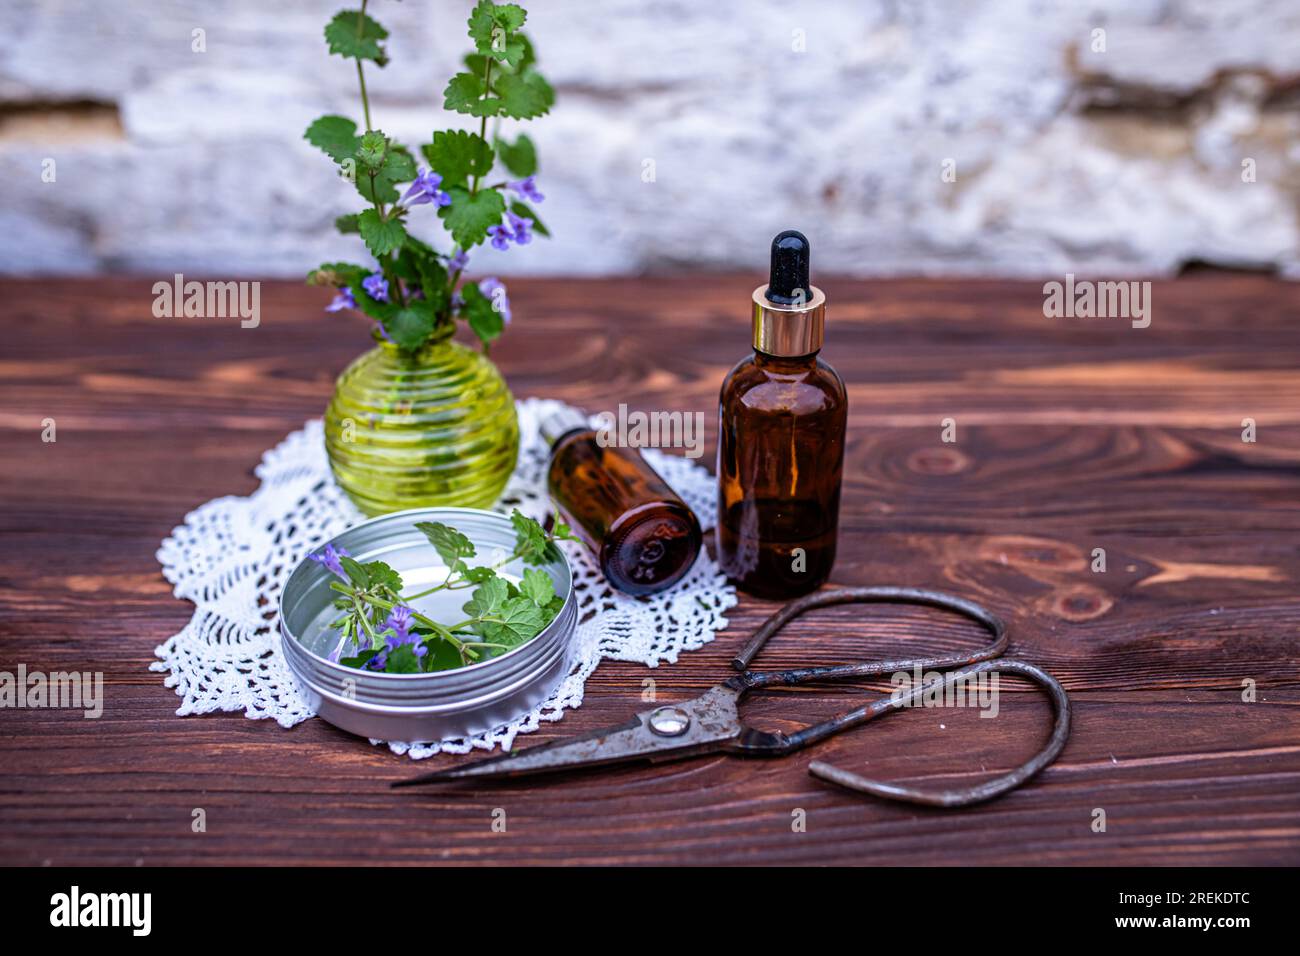 Glechoma hederacea, ground-ivy, gill-over-the-ground, creeping charlie, alehoof, tunhoof, catsfoot, creeping jenny. Cosmetic bottle of oil for body Stock Photo